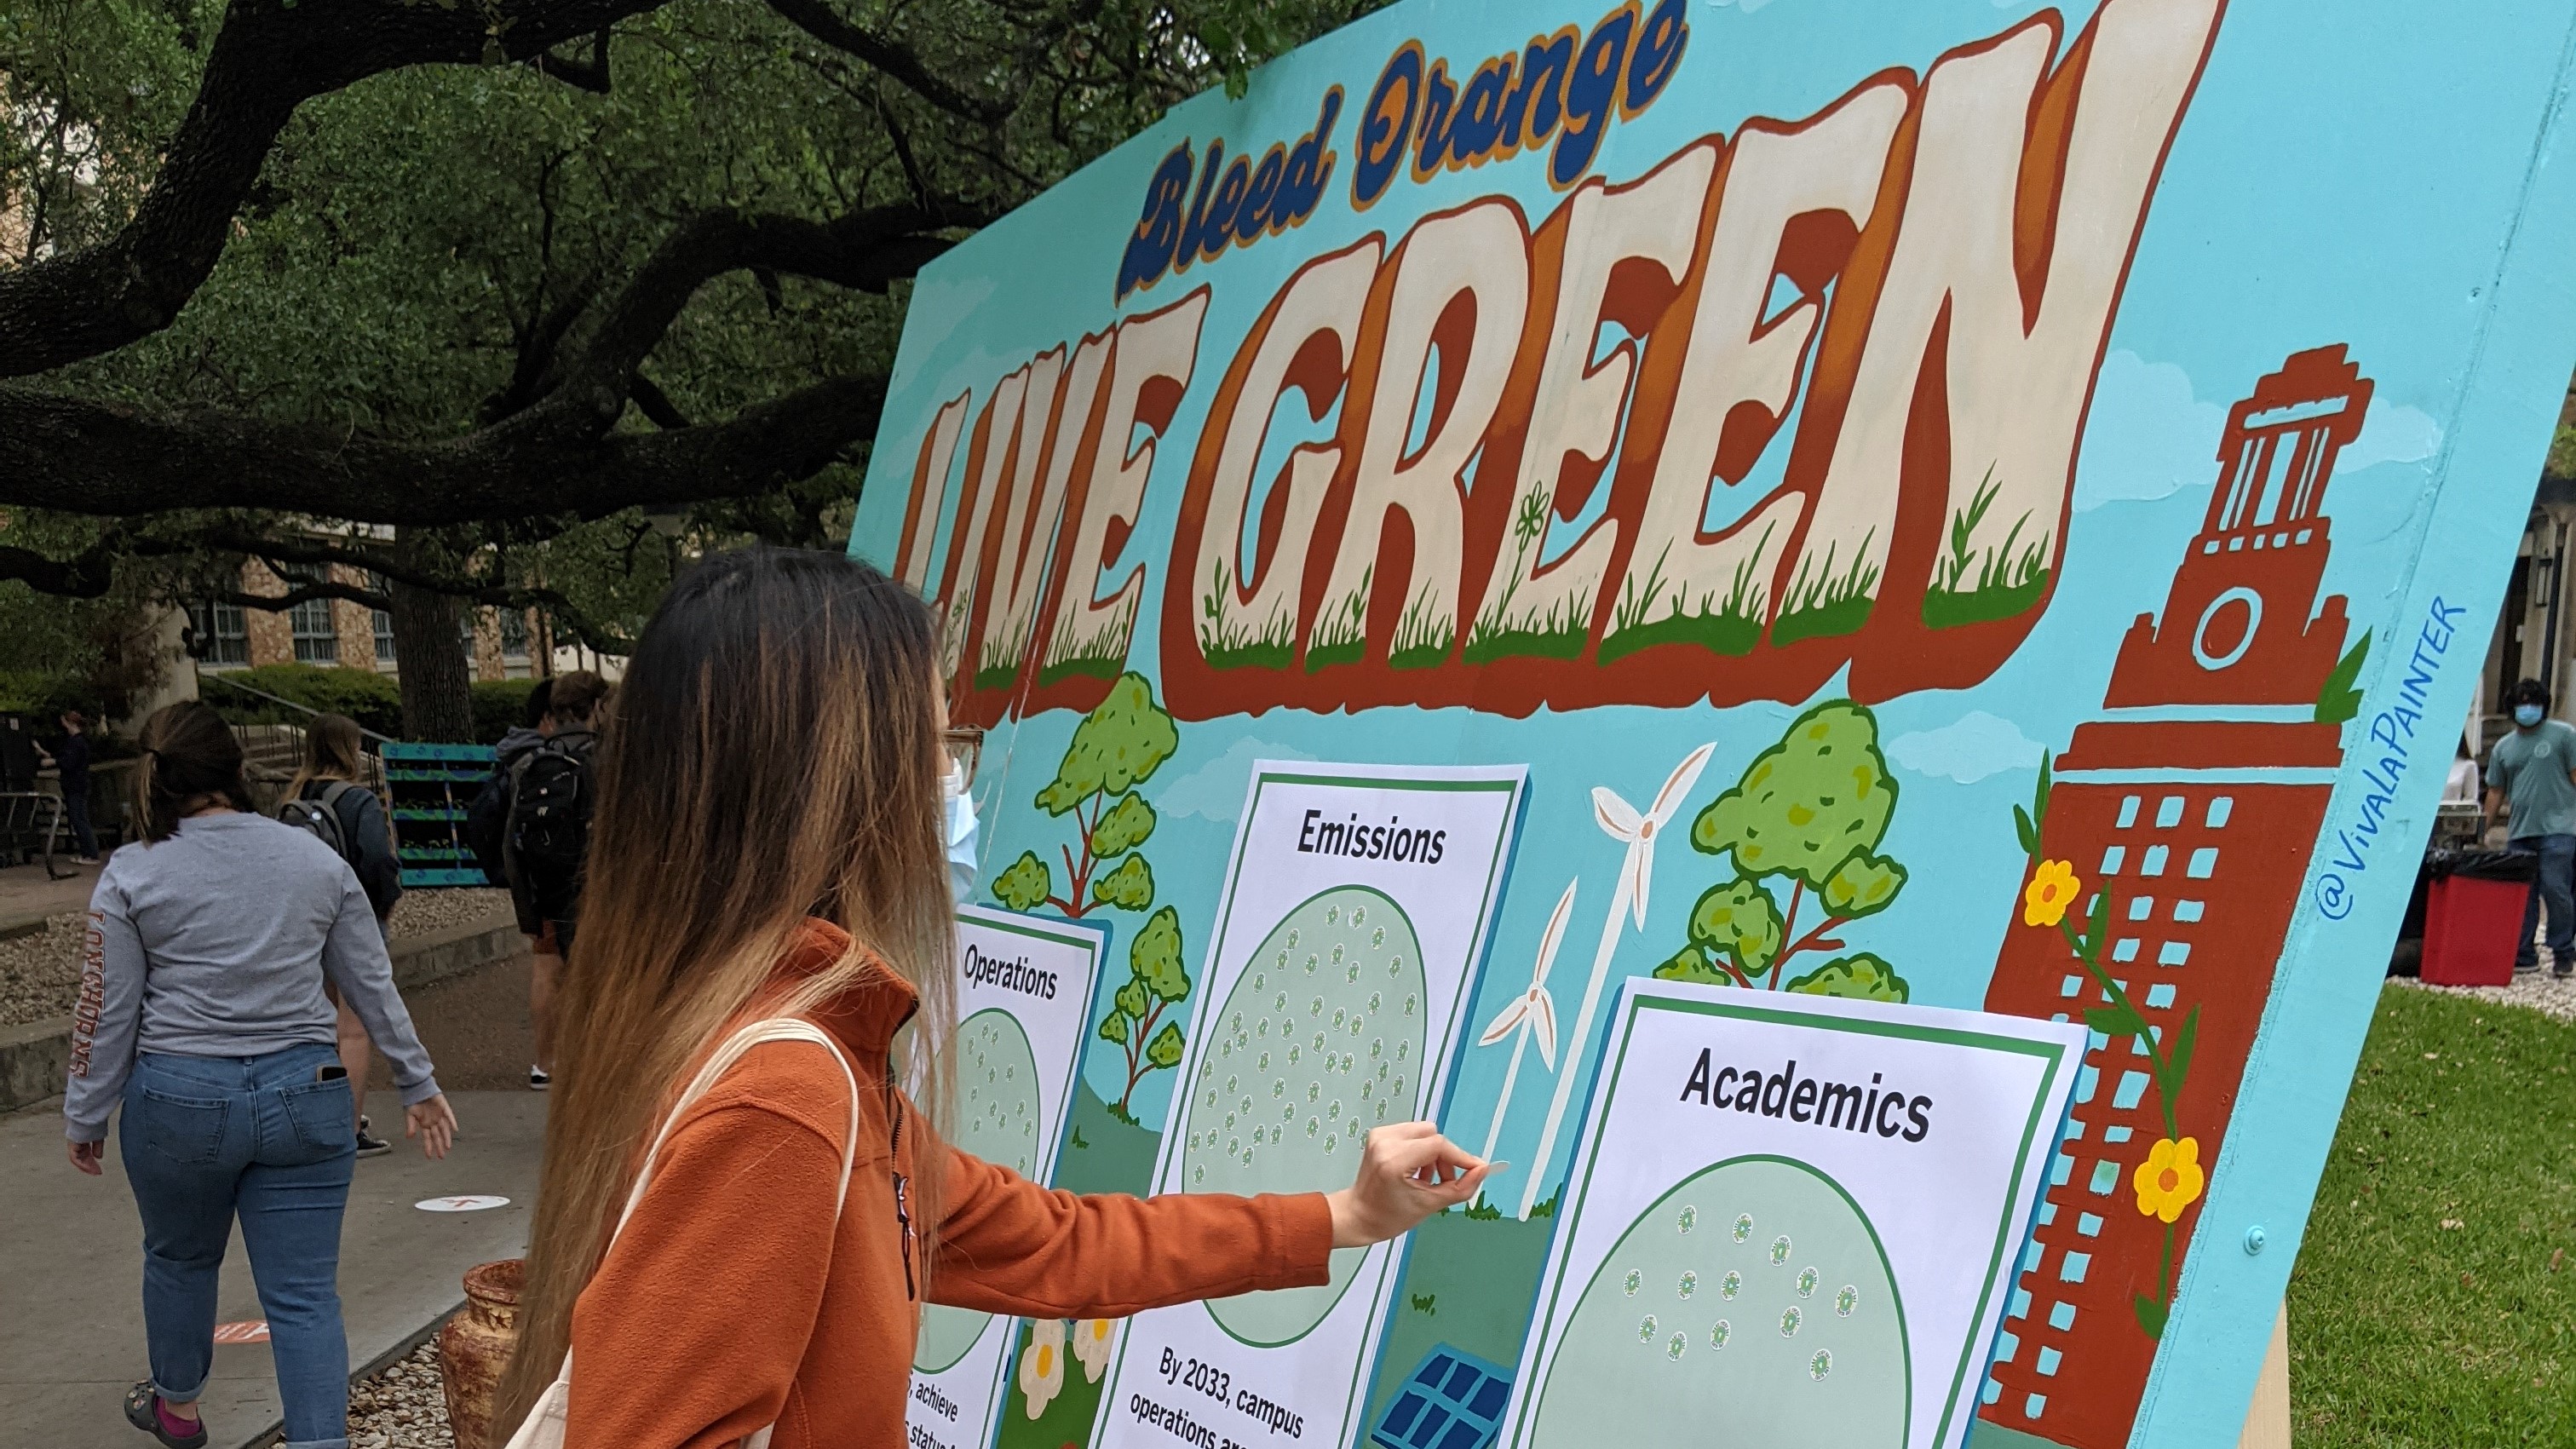 A UT student applies a sticker to a colorful mural that reads Bleed Orange Live Green.